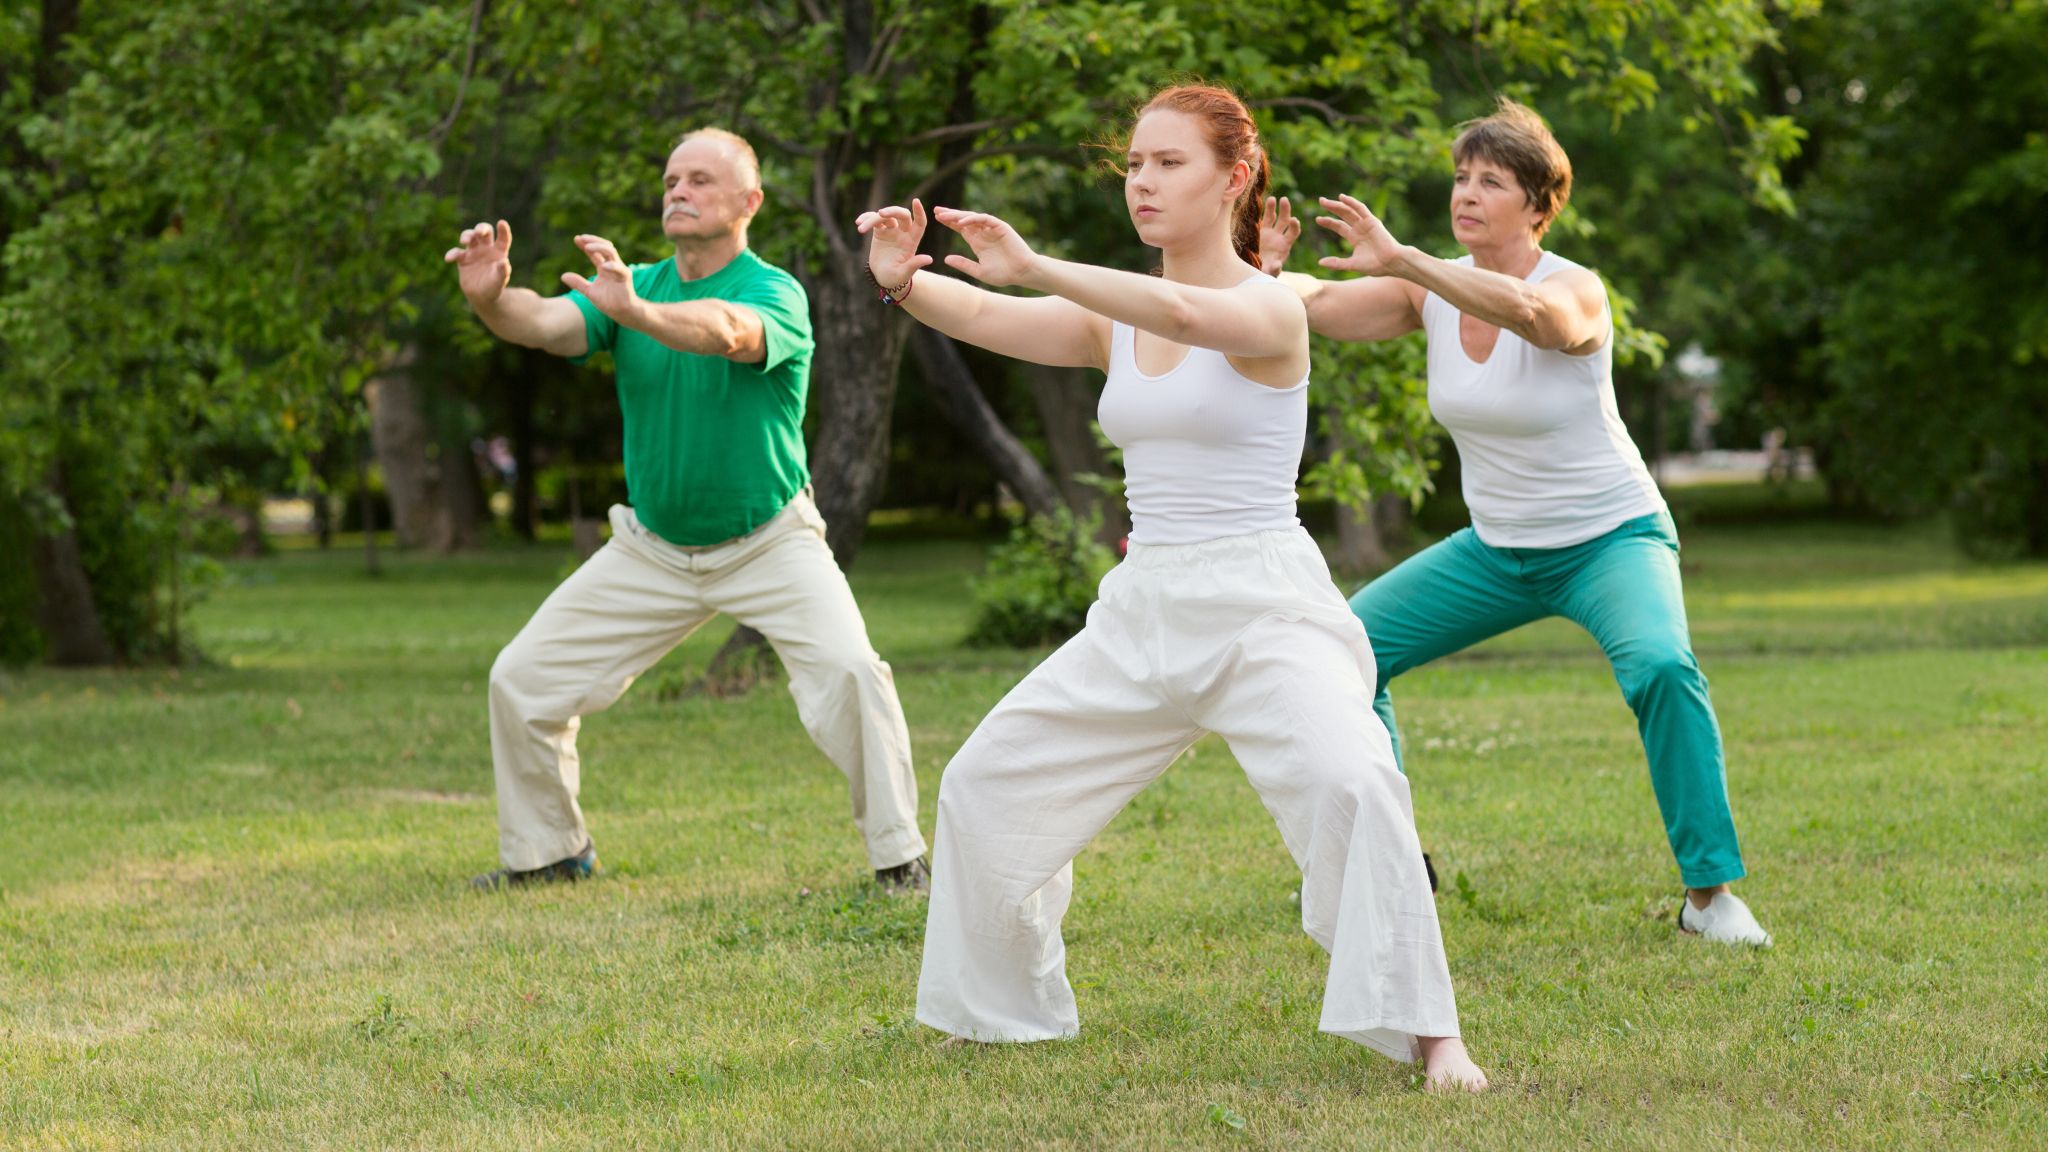 Day 5 7 Relax By Joining A Tai Chi Class